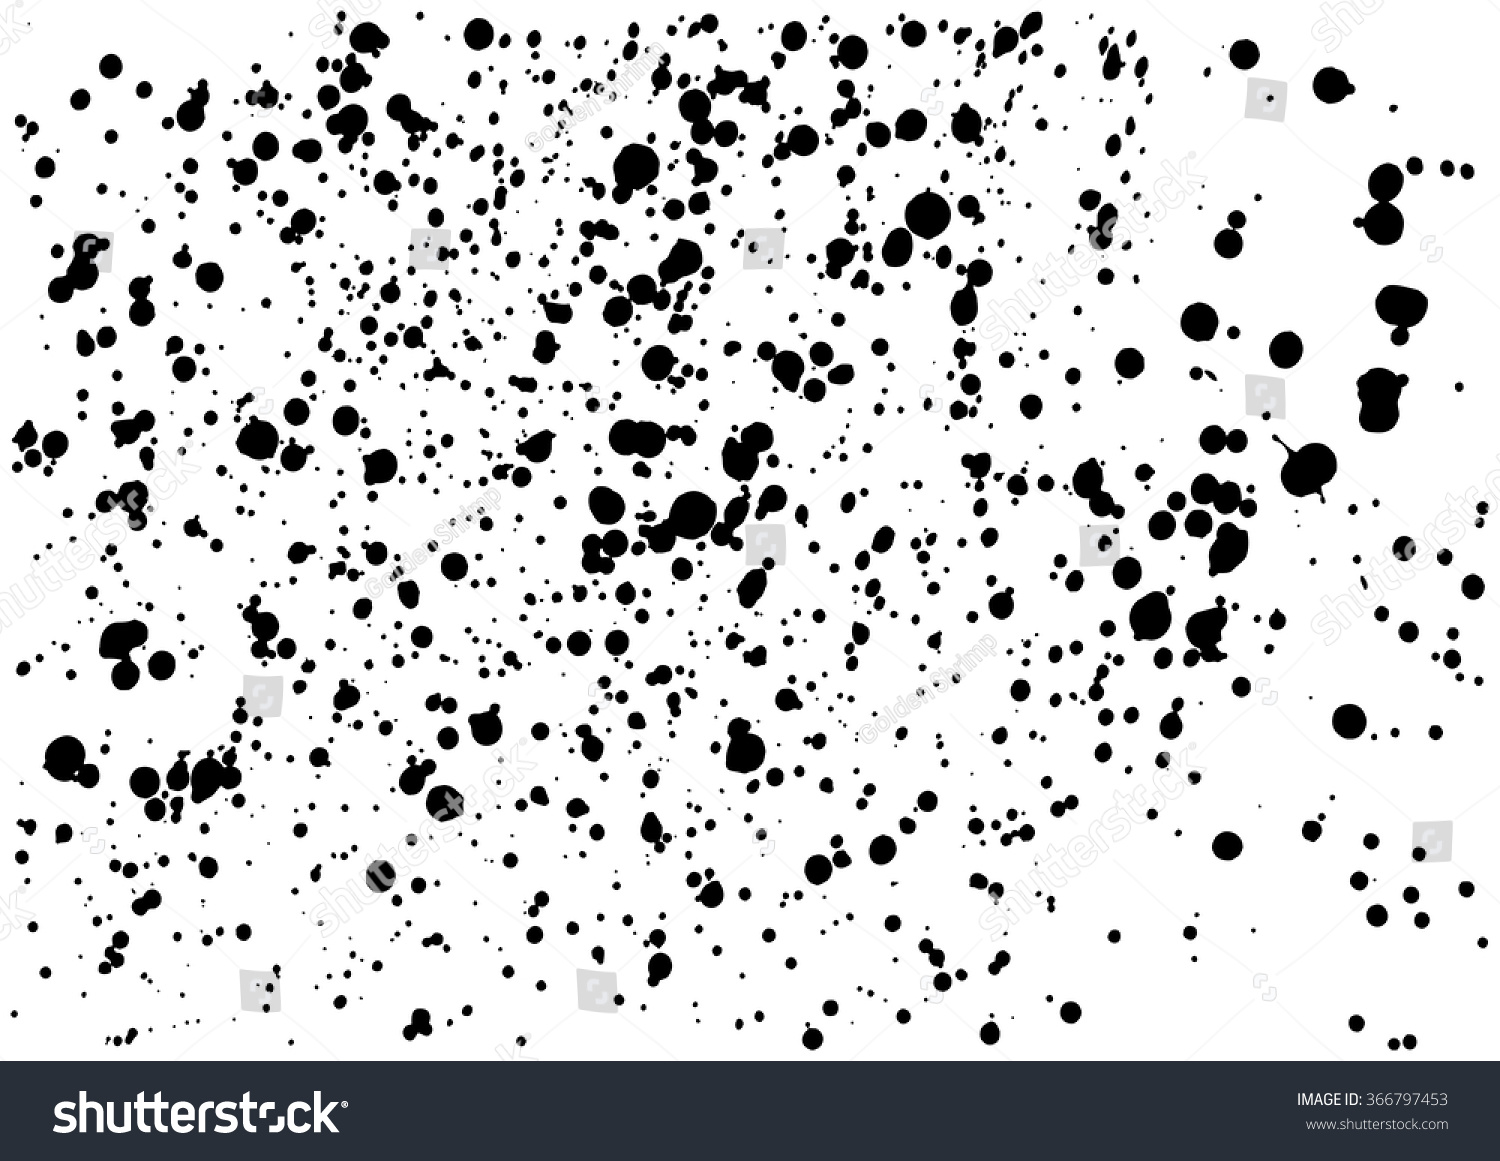 Grainy Grunge Abstract Texture On A White Background. Vector Splatter ...